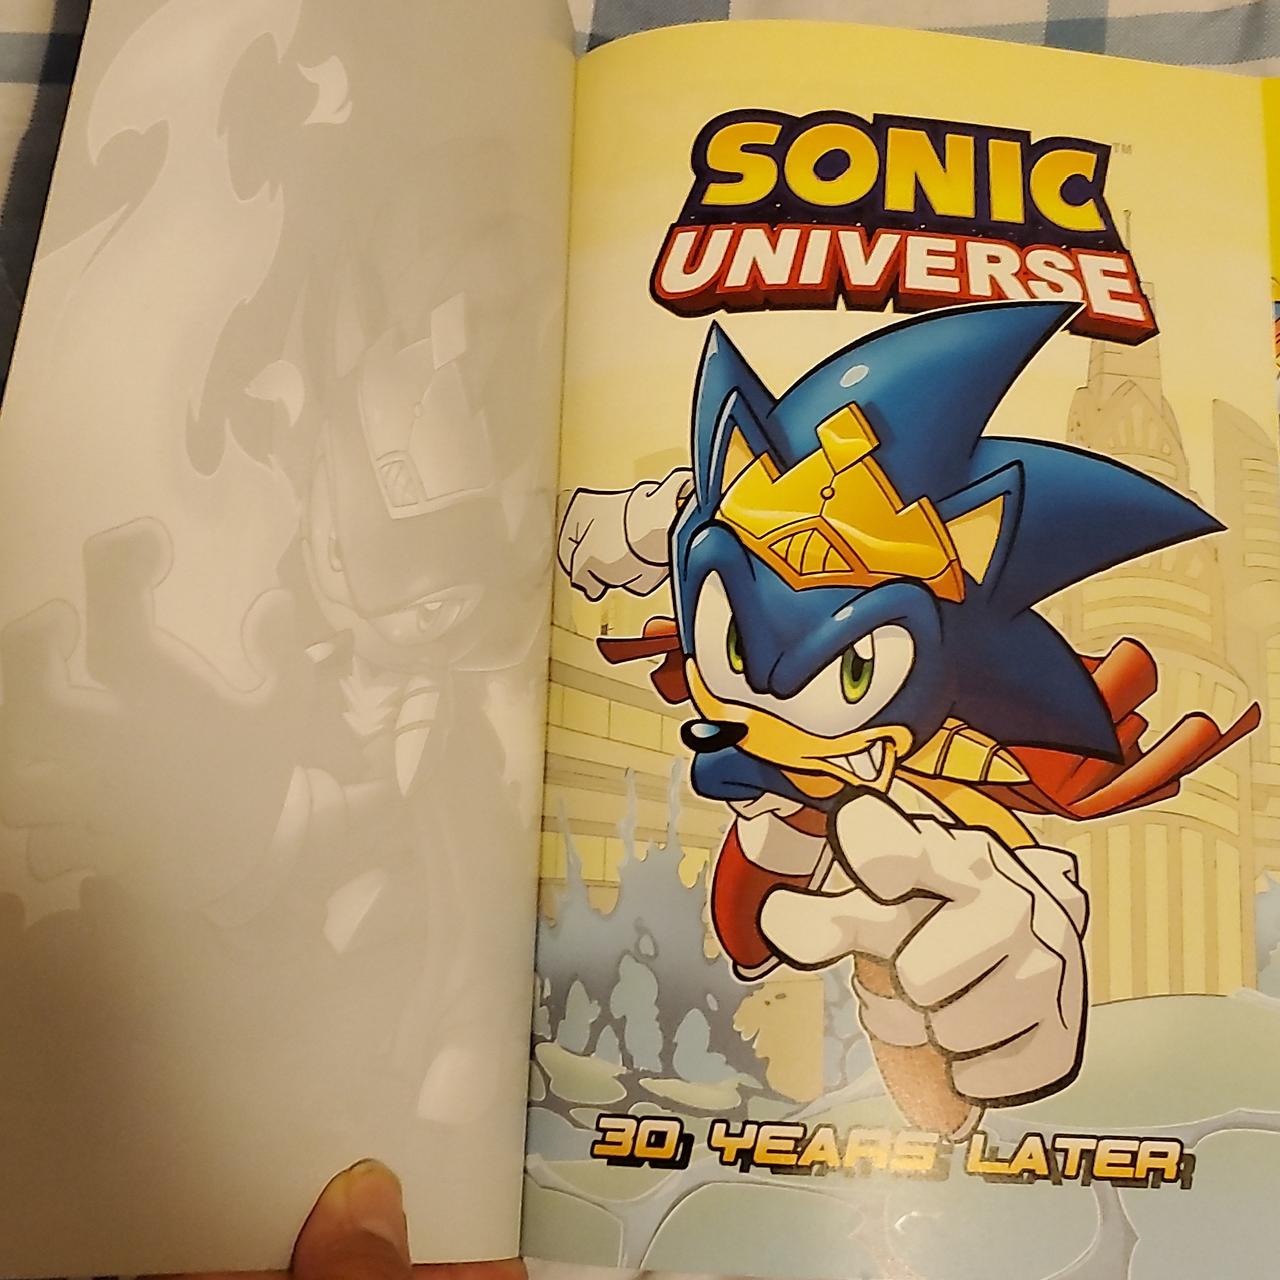 Sonic Universe Volume 2 30 Years Later Review